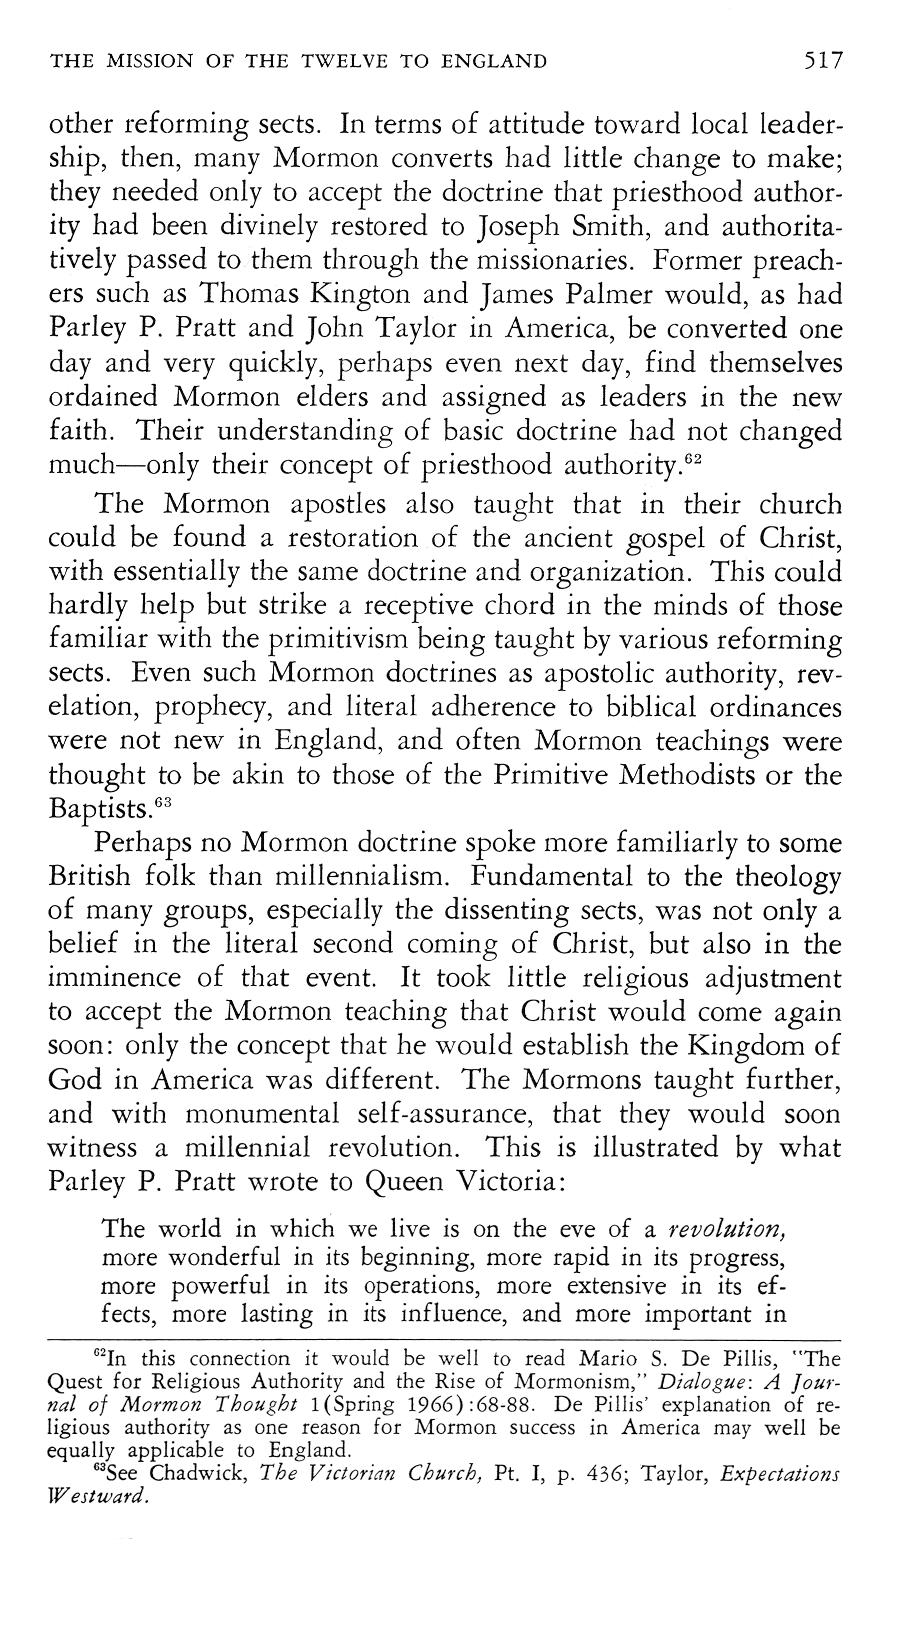 Allen and Thorp: The Mission of the Twelve to England, 1840-41: Mormon Apostles an THE MISSION OF THE TWELVE TO ENGLAND 517 other reforming sects in terms of attitude toward local leadership then